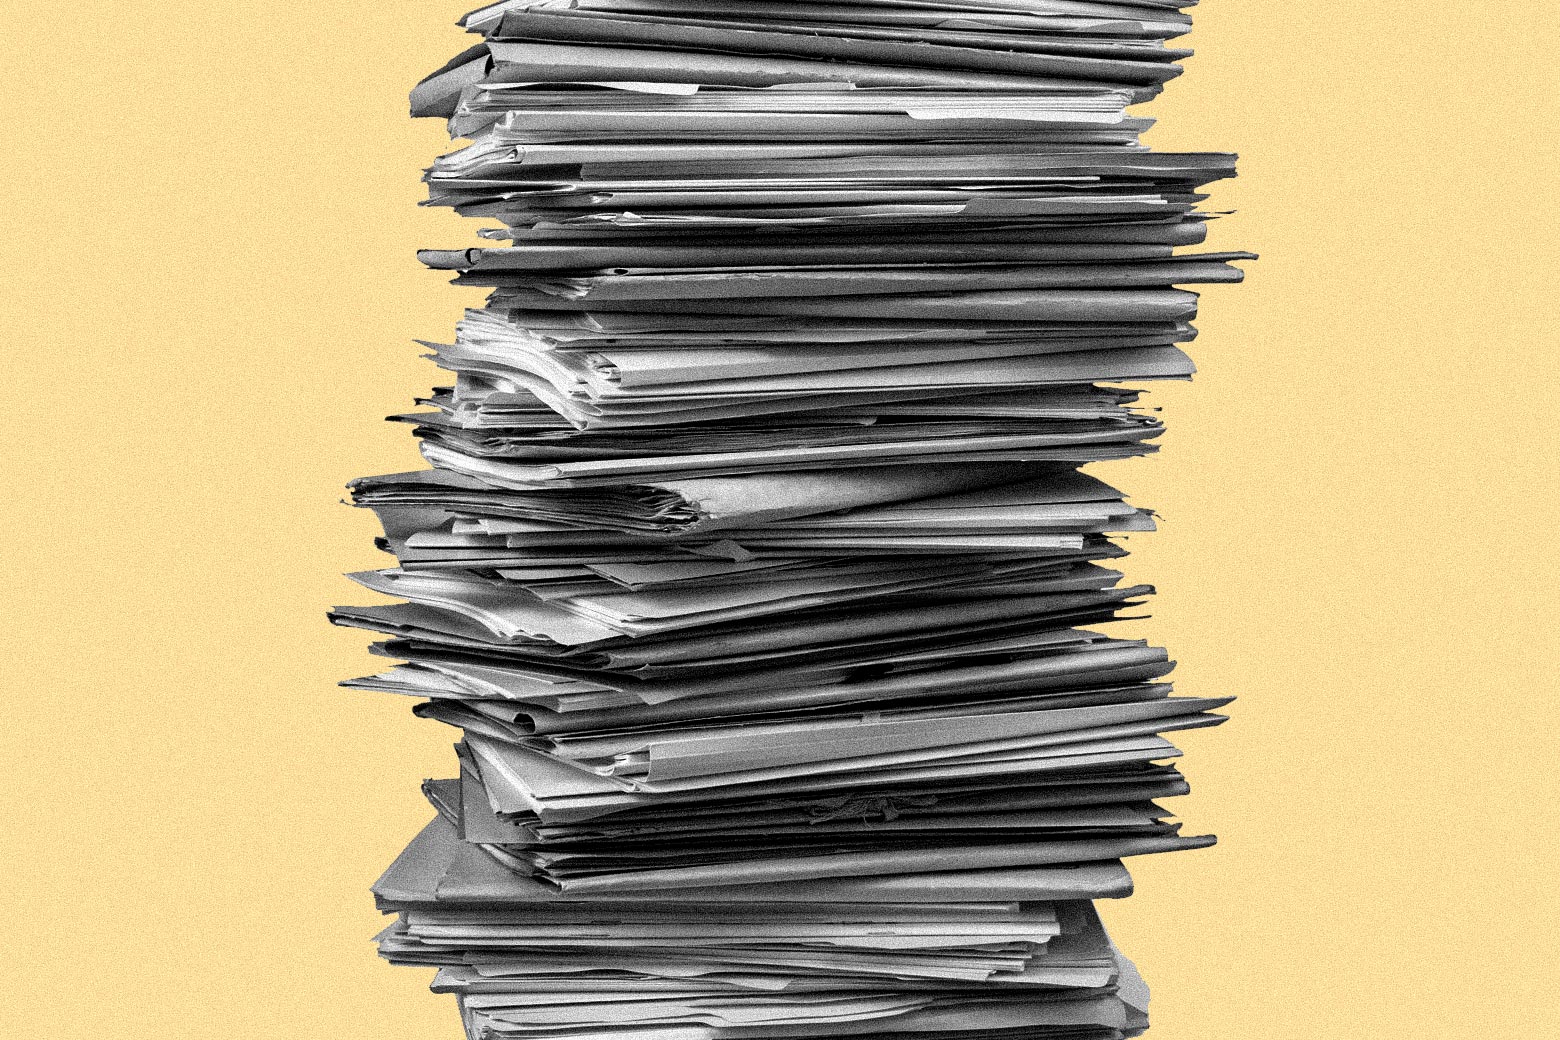 A stack of folders.